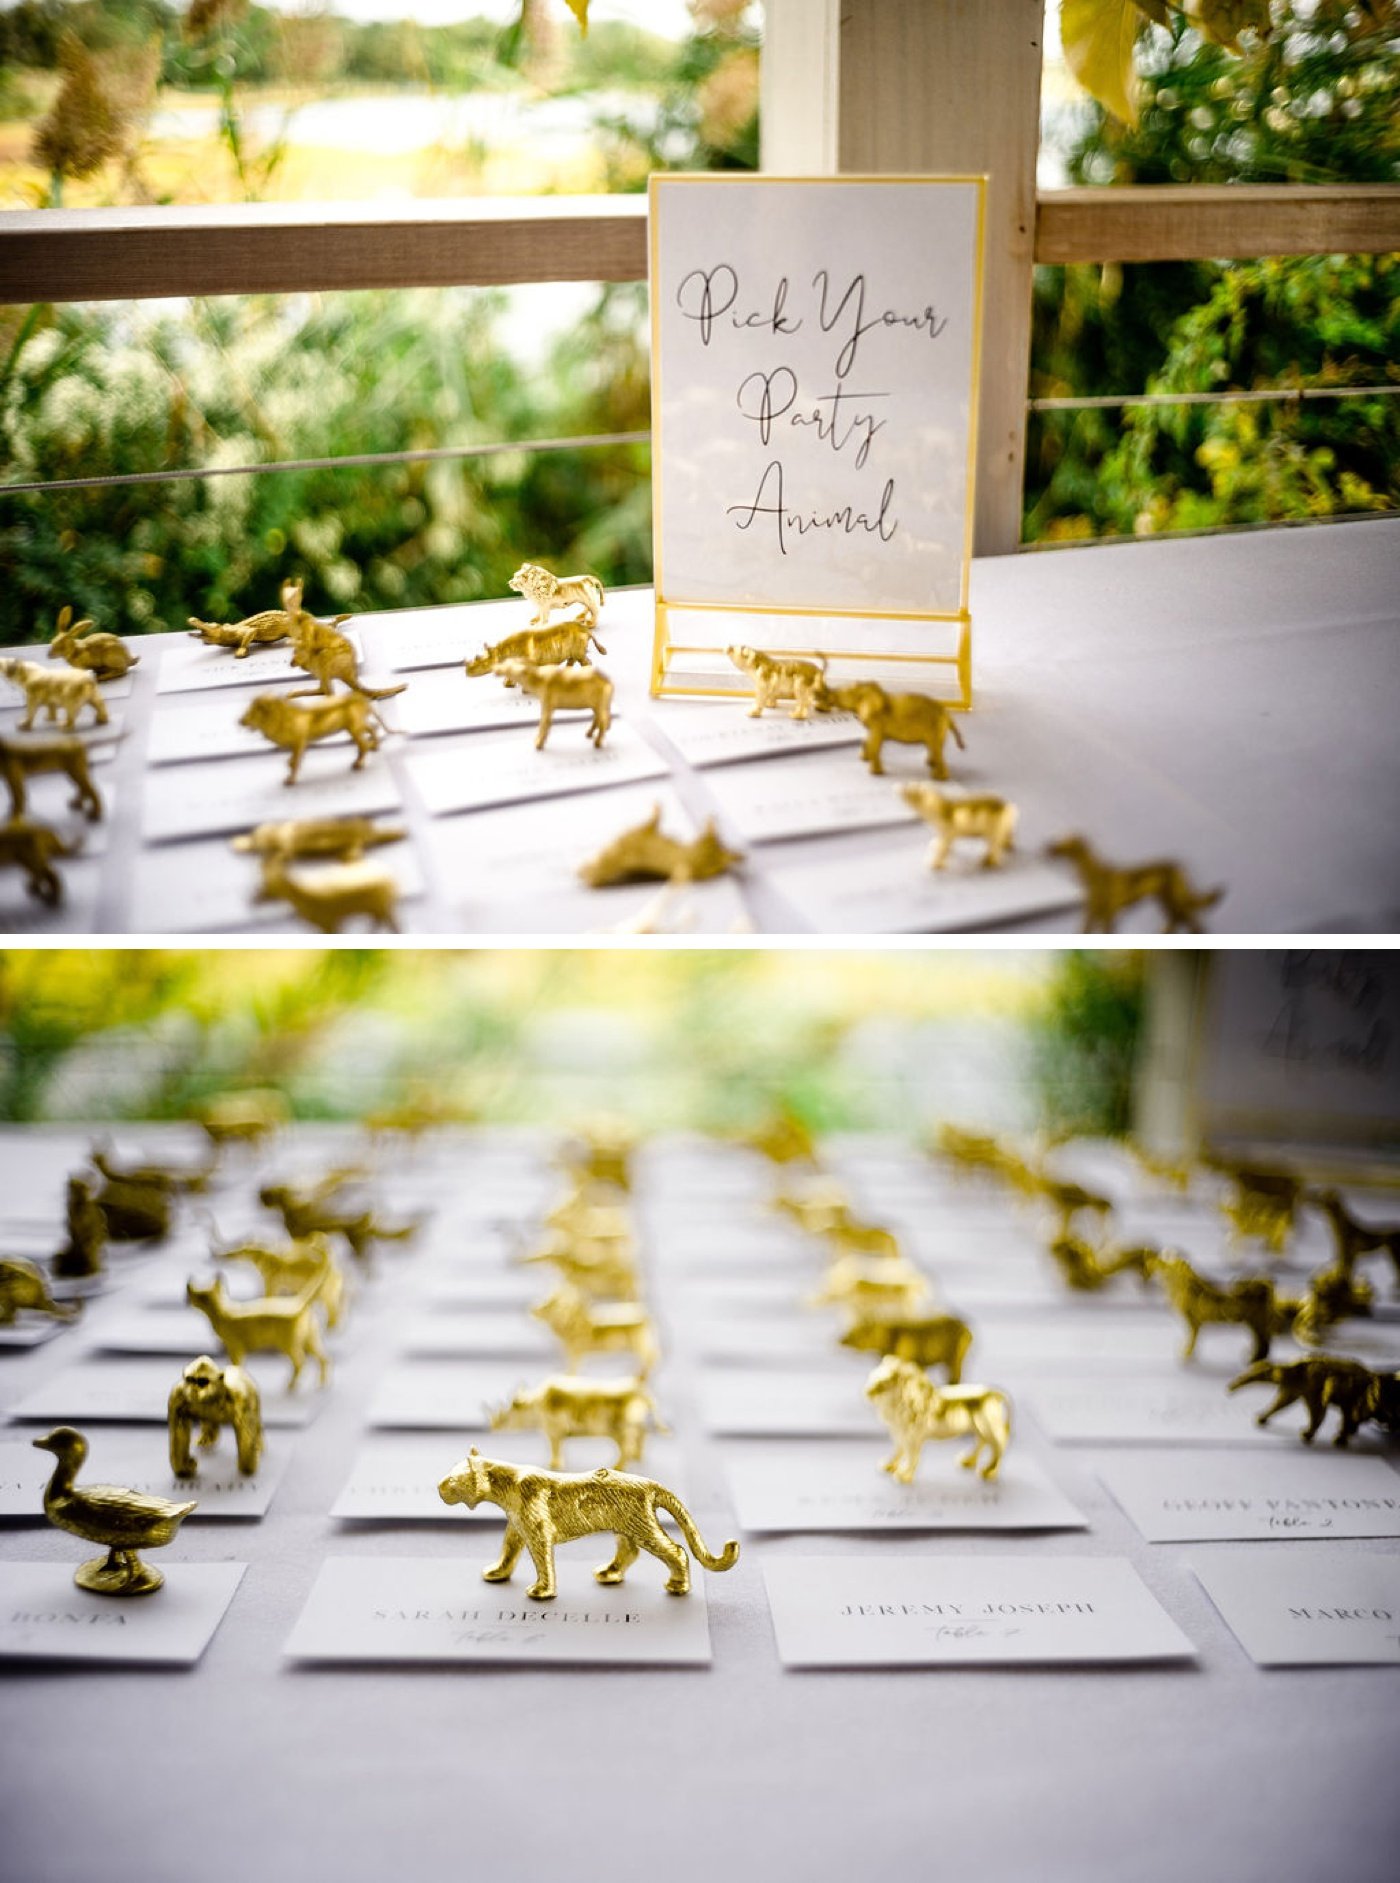 Golden animal-shaped paperweights on top of escort cards at a wedding reception